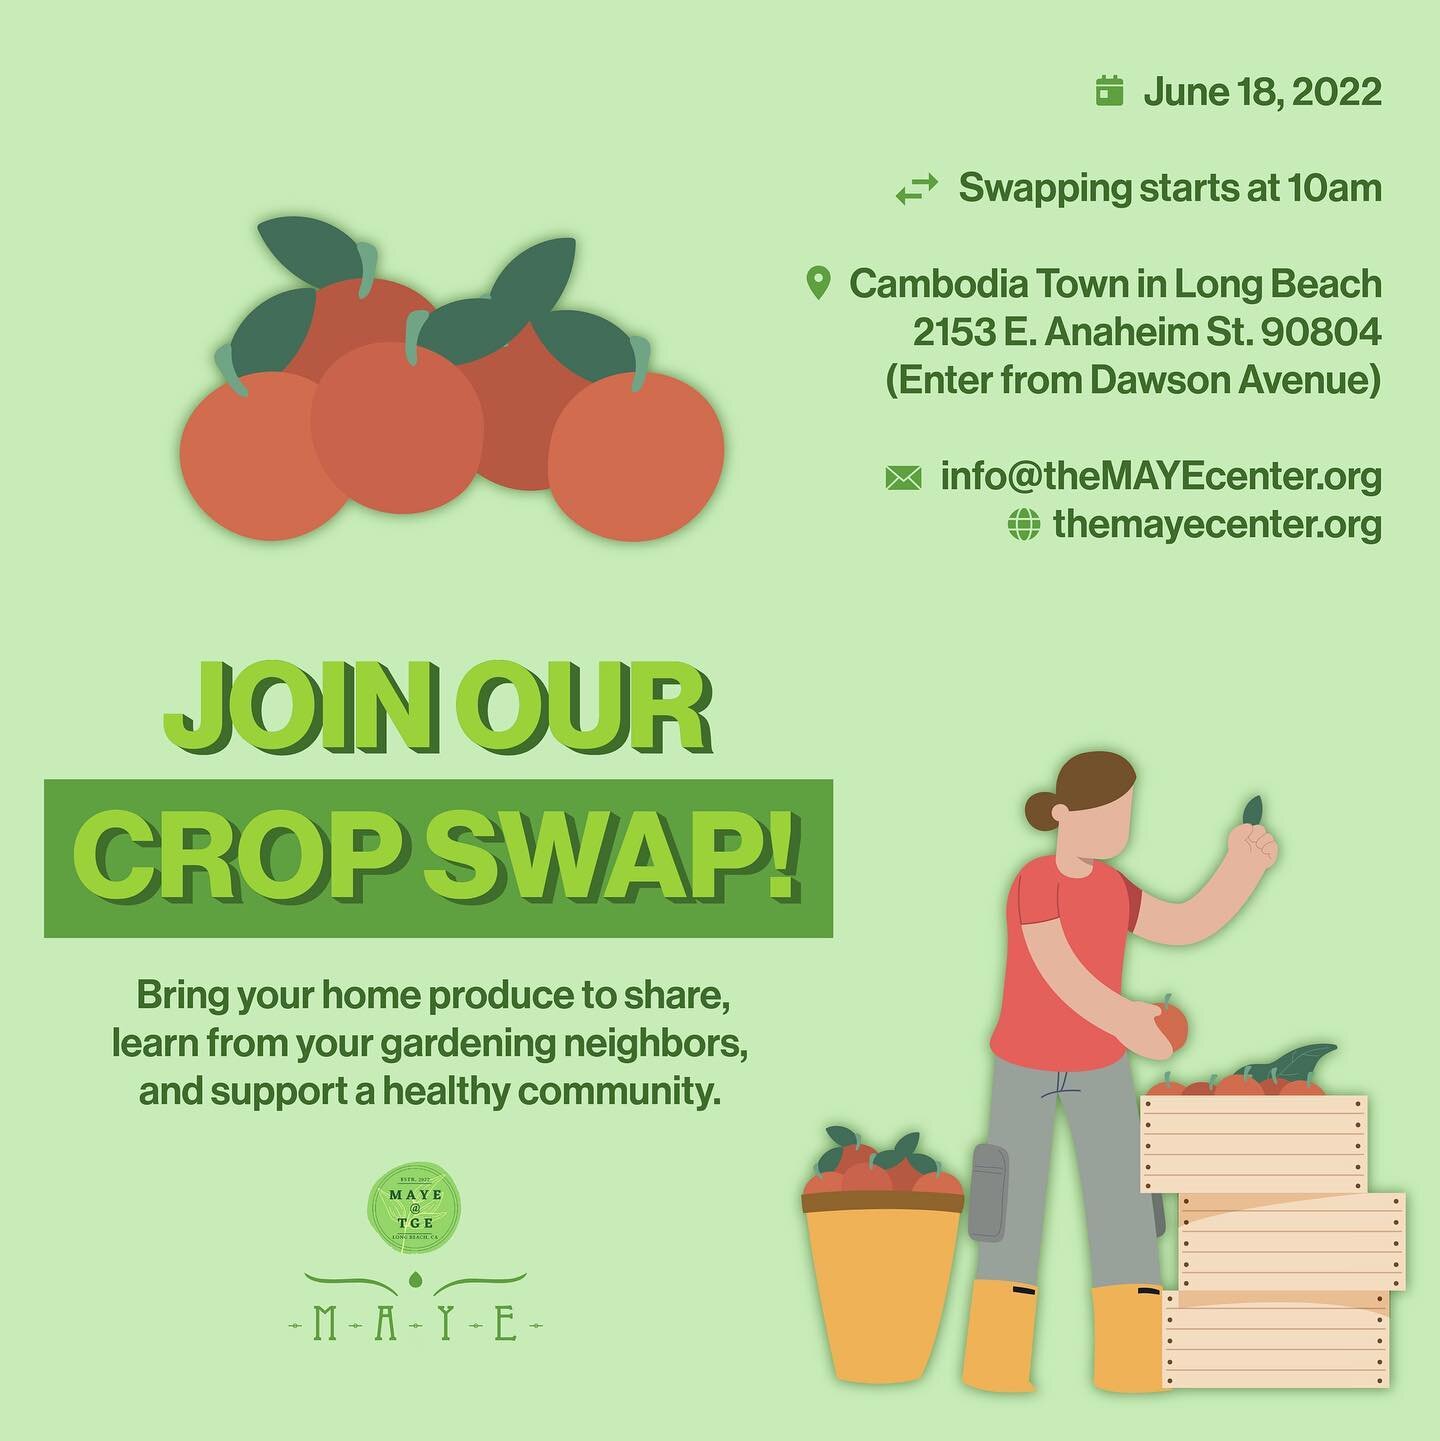 🌾 Community Crop Swap in Cambodia Town at the MAYE Center this Saturday, June 18th! Swapping begins at 10am. (🗓 We host Crop Swaps every 3rd Saturday of the month!)

🥕 Bring the excess produce from your home garden and pick up other ingredients gr